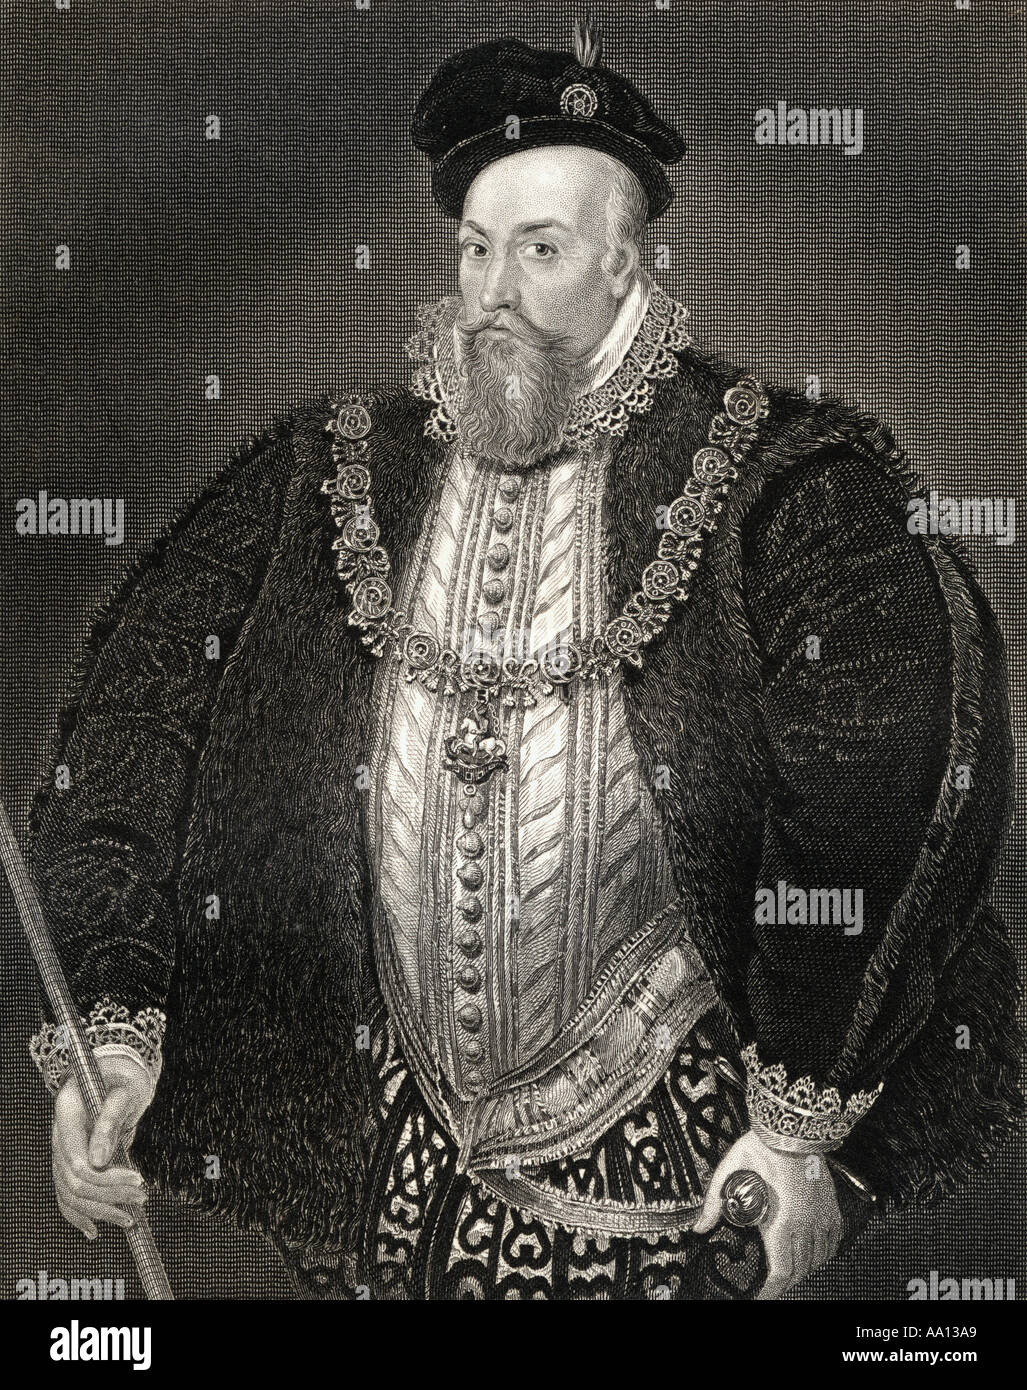 Robert Dudley, 1st Earl of Leicester, Baron Denbigh, c.1532 - 1588.English political and military leader, Favourite of Elizabeth I Stock Photo